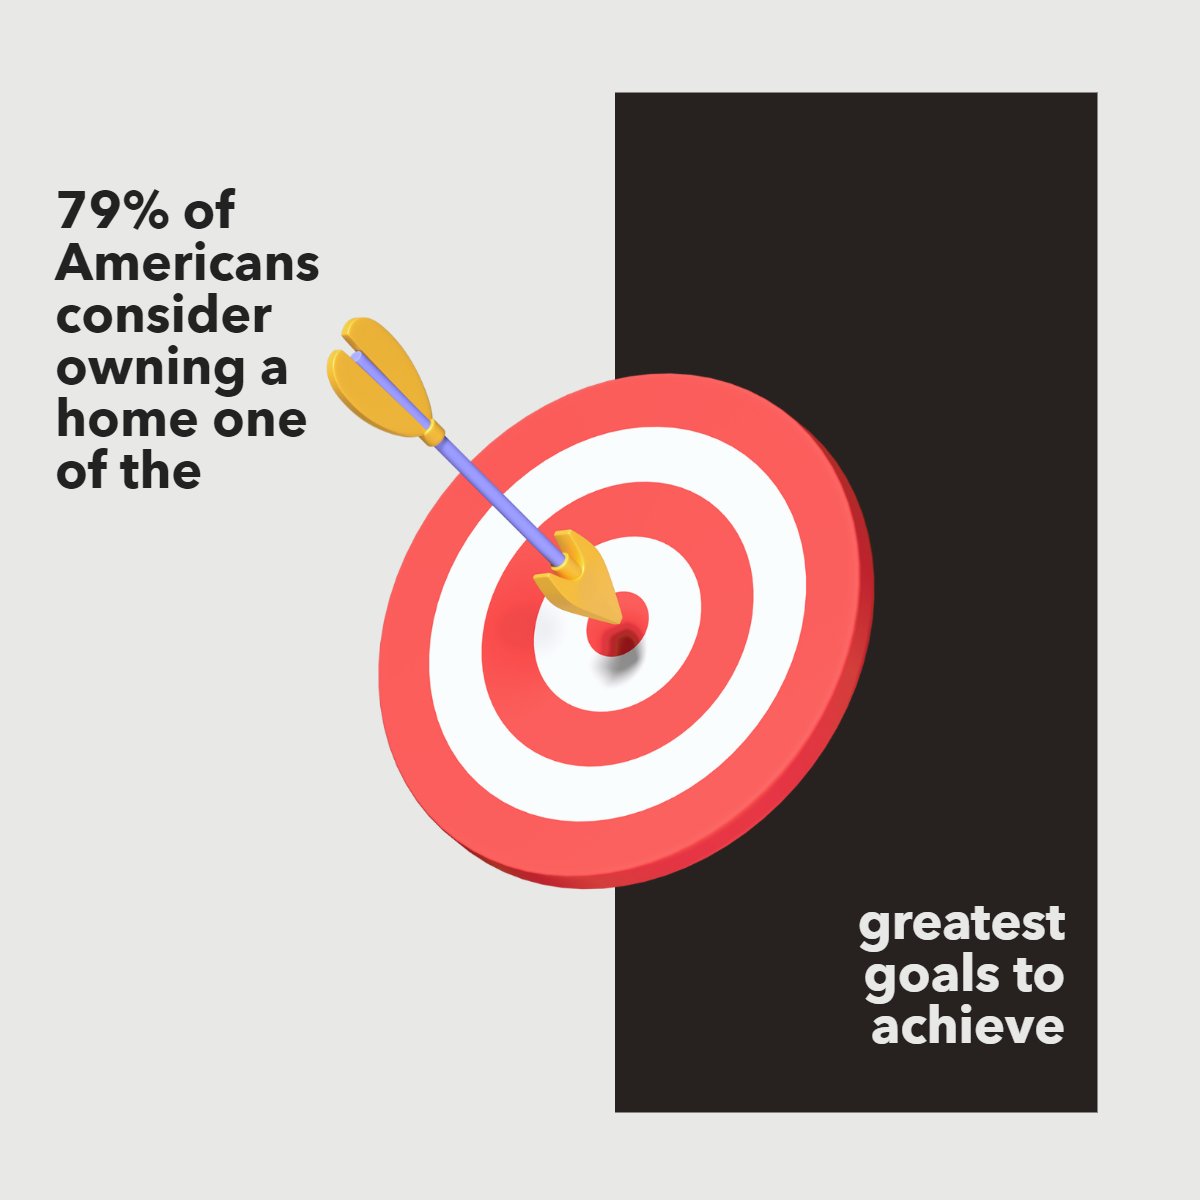 What do you consider a goal in your life? 🤔

Let us know below!

#didyouknow  #didyouknowfacts  #manhattan  #factoftheday  #realestatefact
#arodteam #teamarod #veteranrealtor #scvrealestate #usmc #semperfidlis #usmcveteran #veterans #semperfi #military #scvhomes